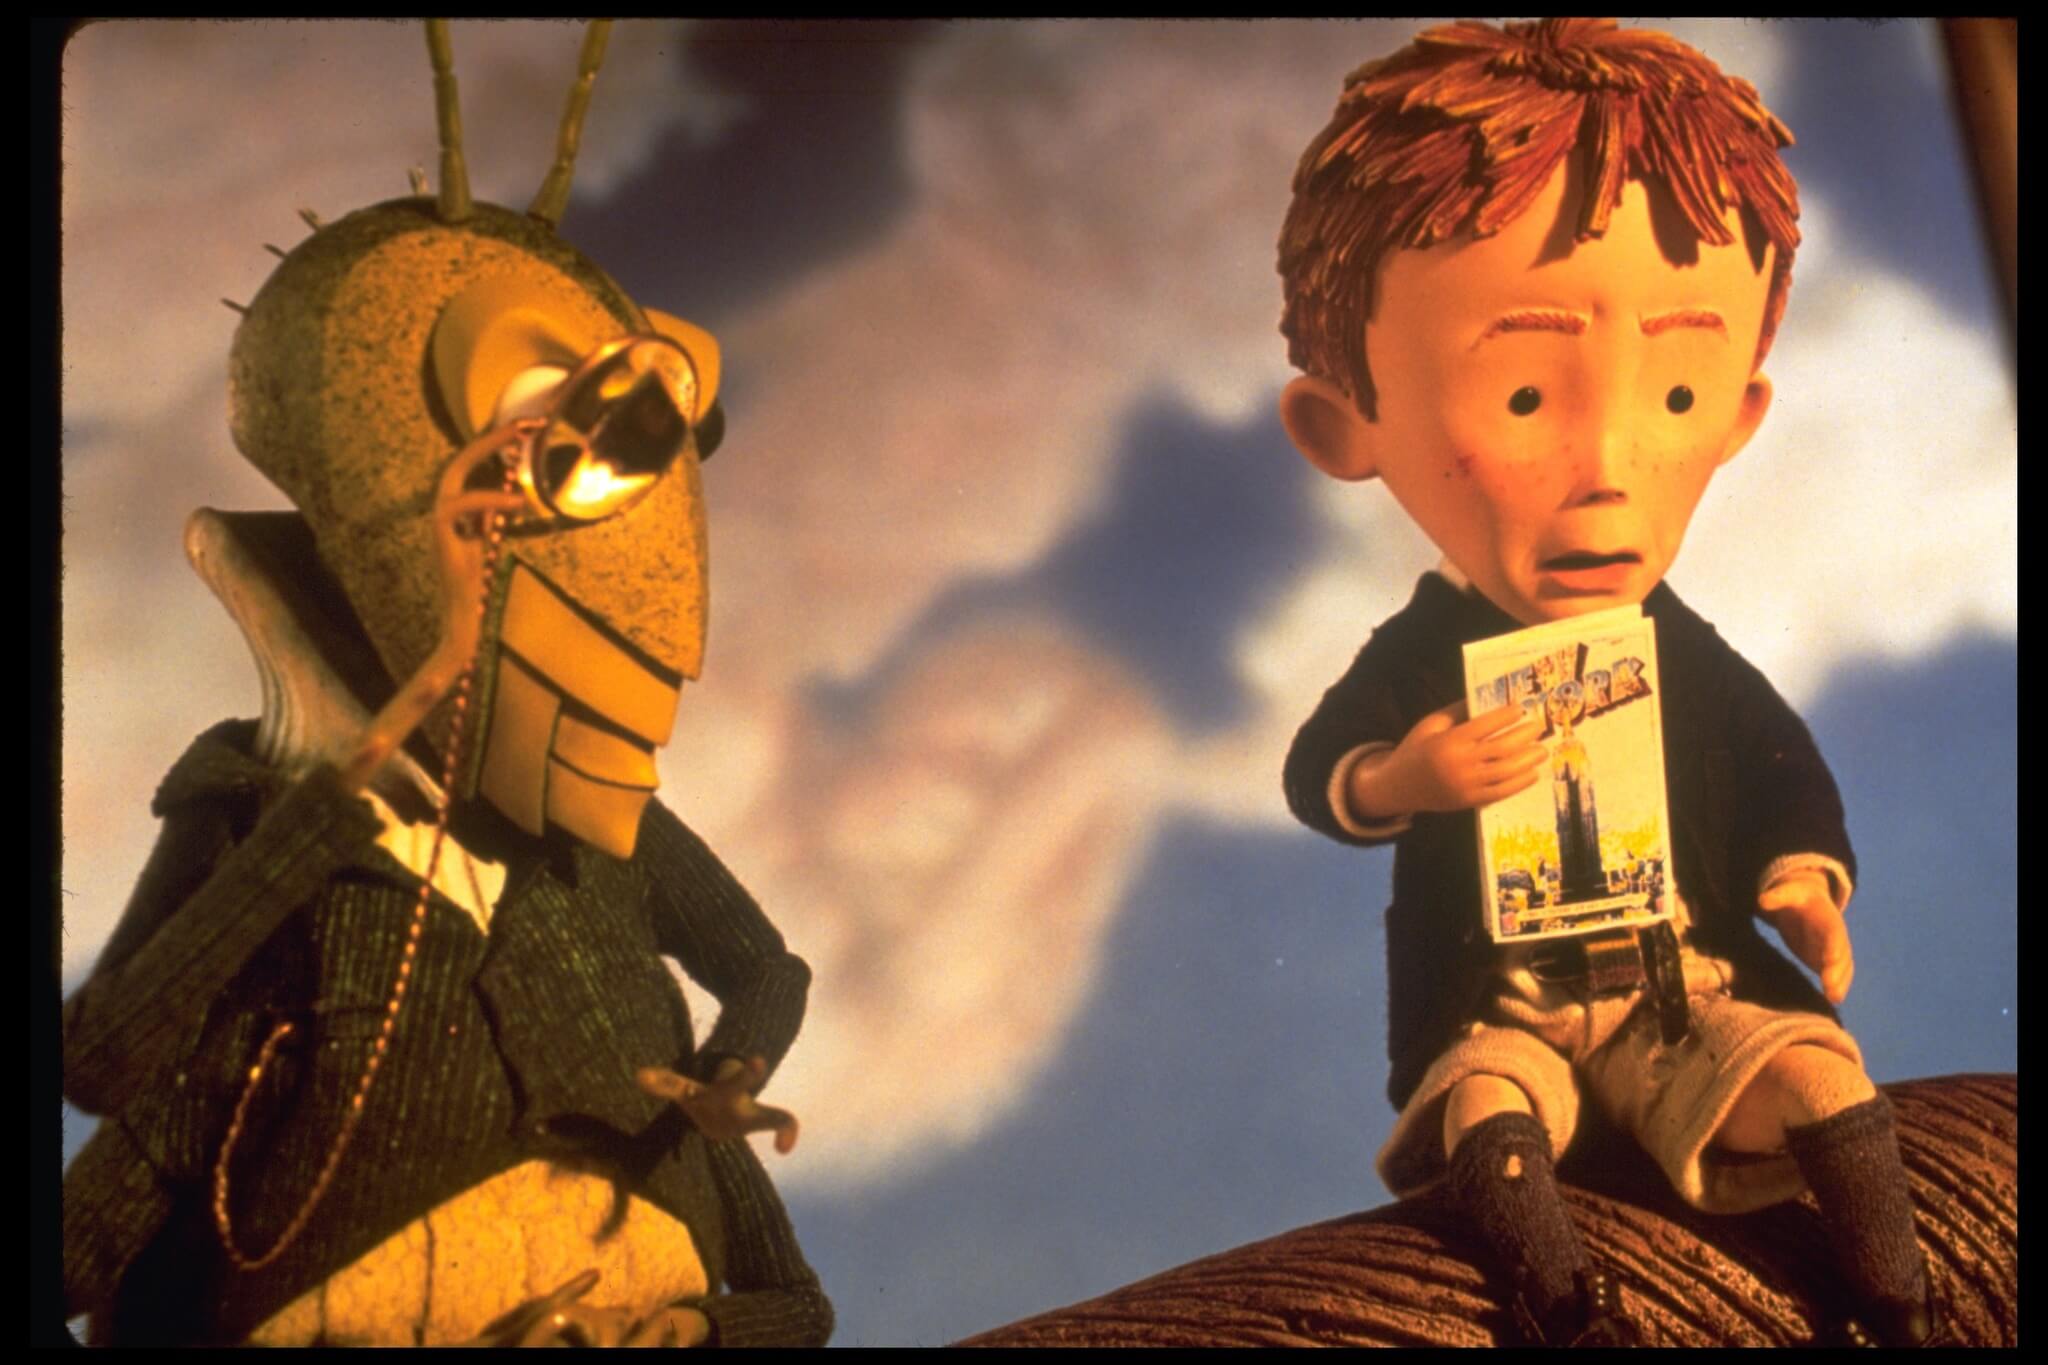 James-and-the-Giant-Peach-(1996)-in-Hong Kong